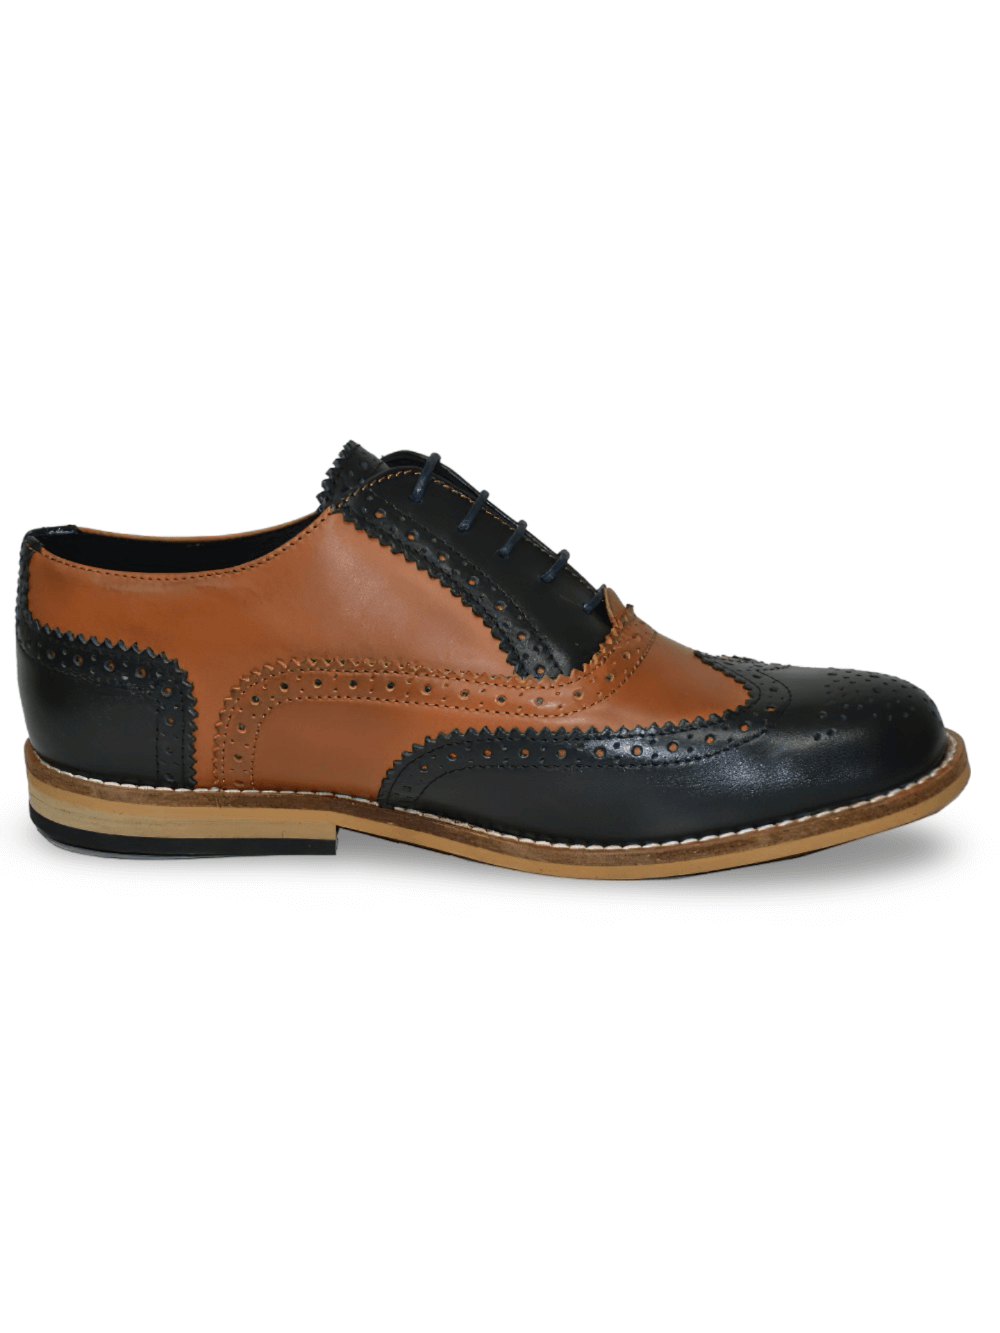 Chic Brown And Black Grained Leather Oxford Shoes for Men